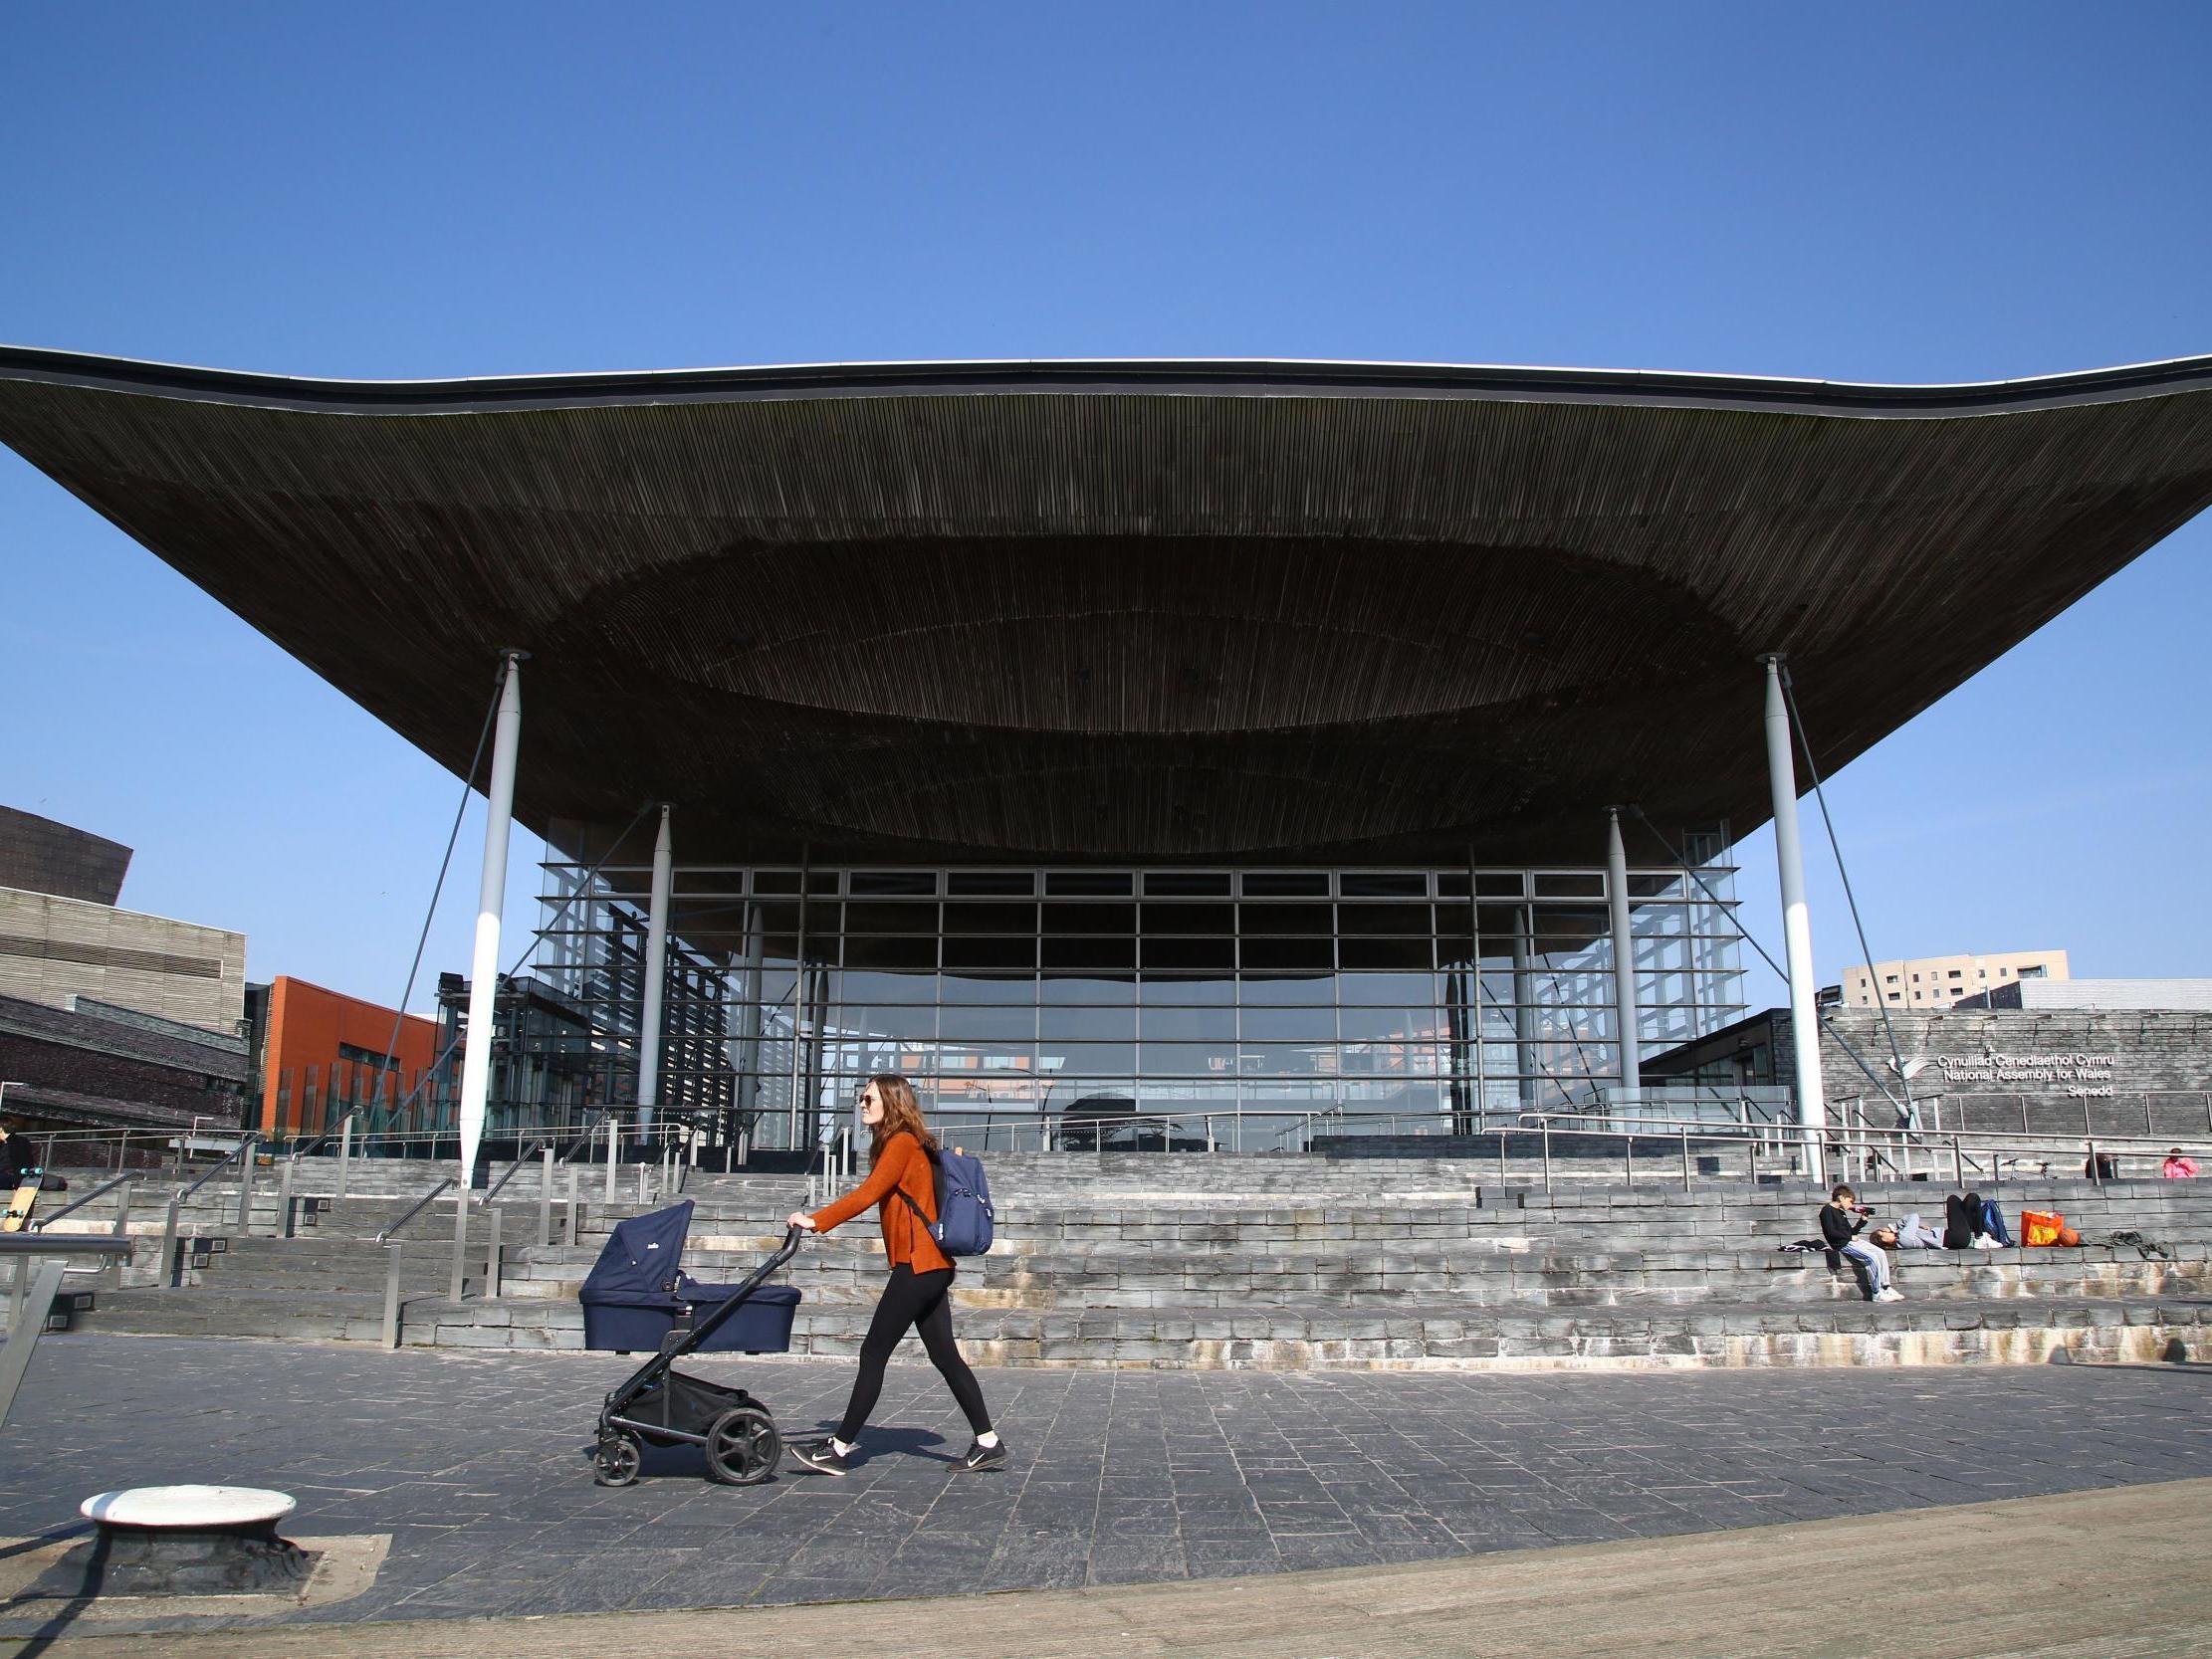 File image of the Senedd Building in Cardiff Bay, south Wales, 24 March 2020.